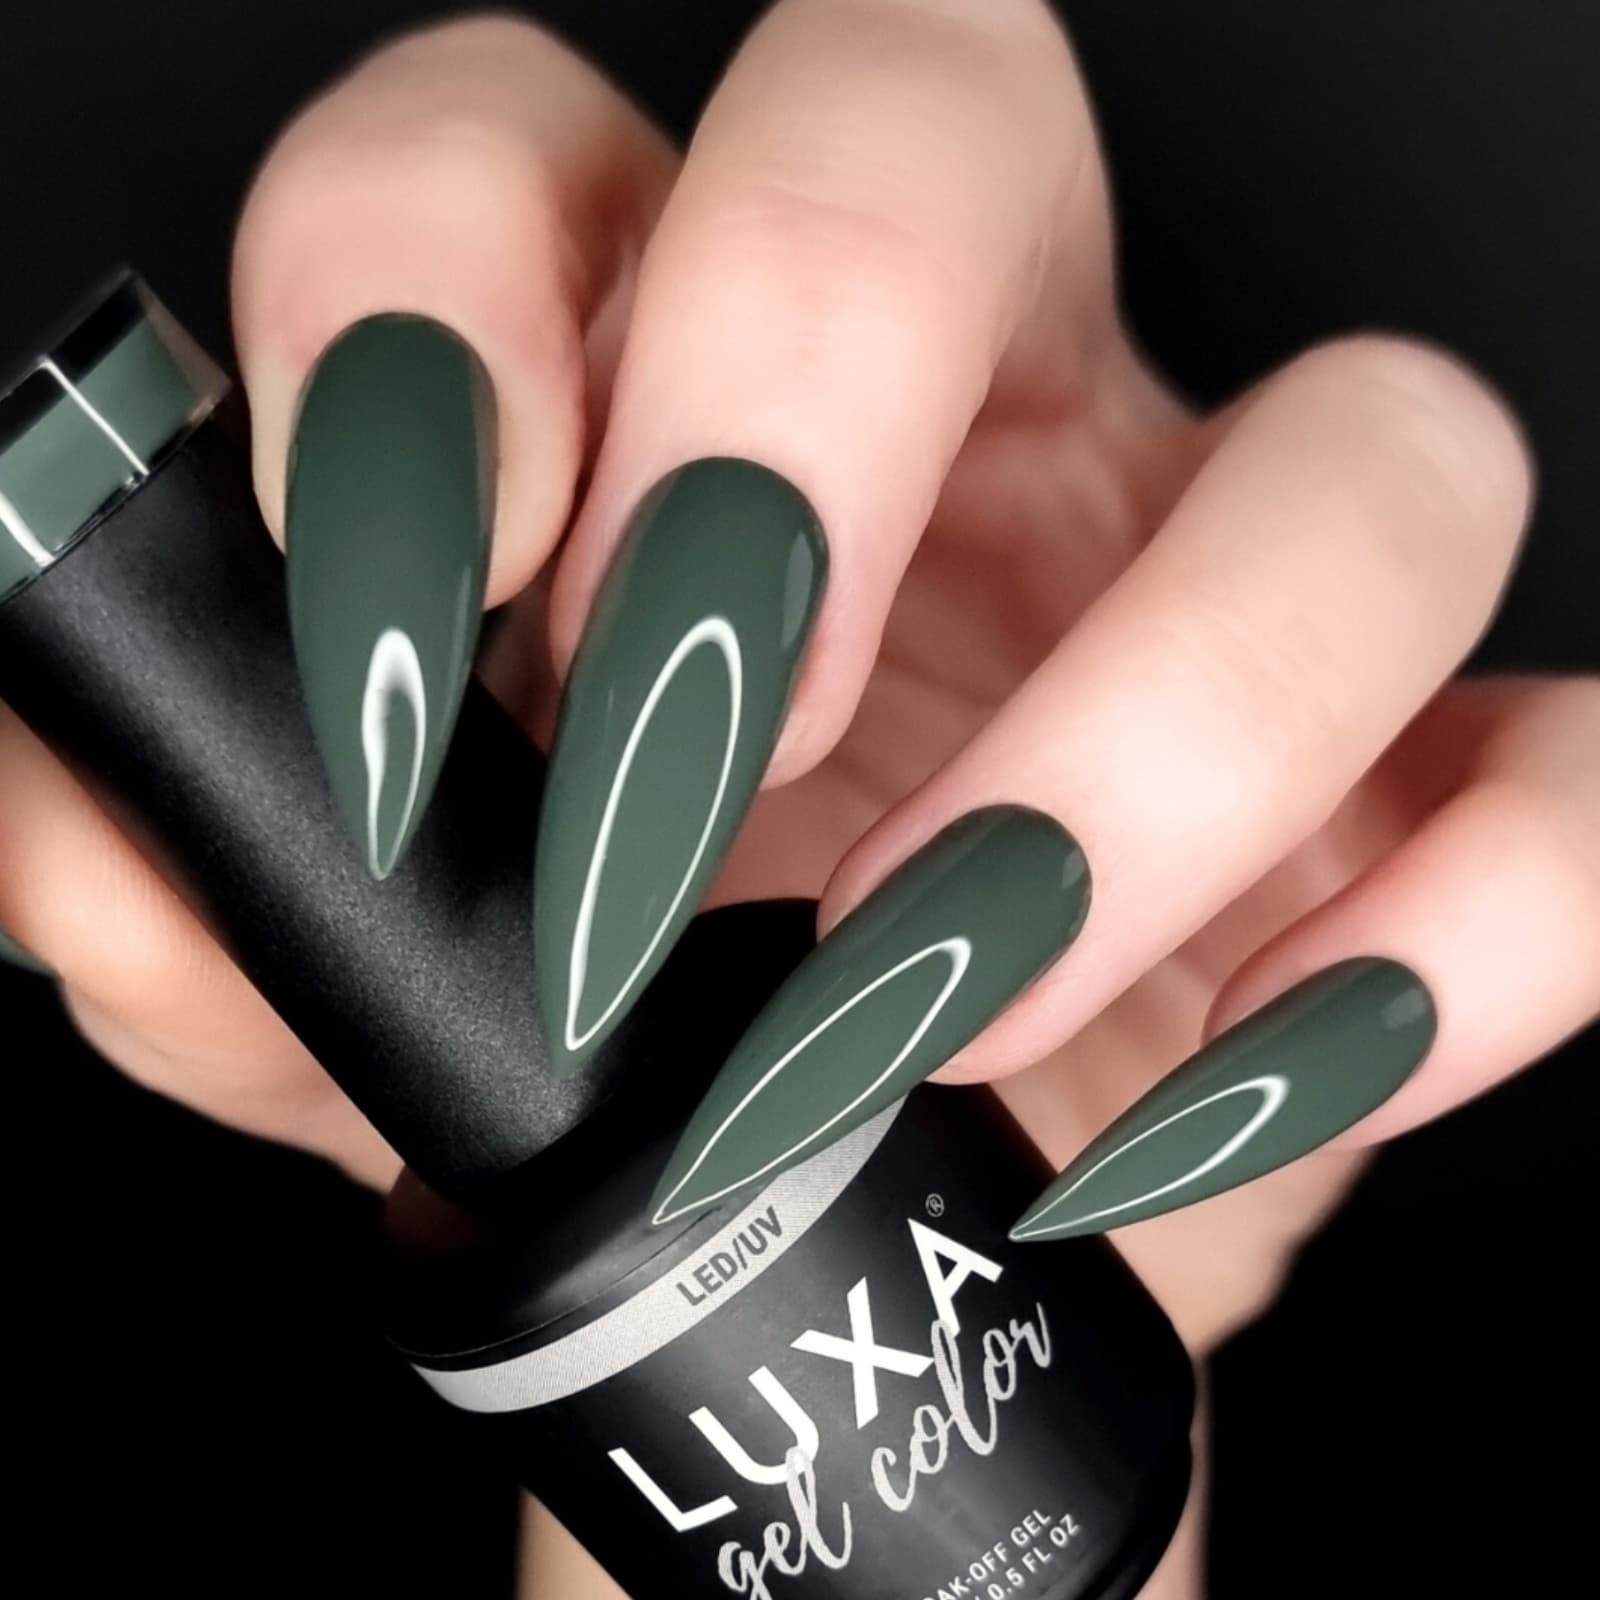 Luxapolish Olive Juice Collection - 6pcs with Free Painted Swatch Sticks